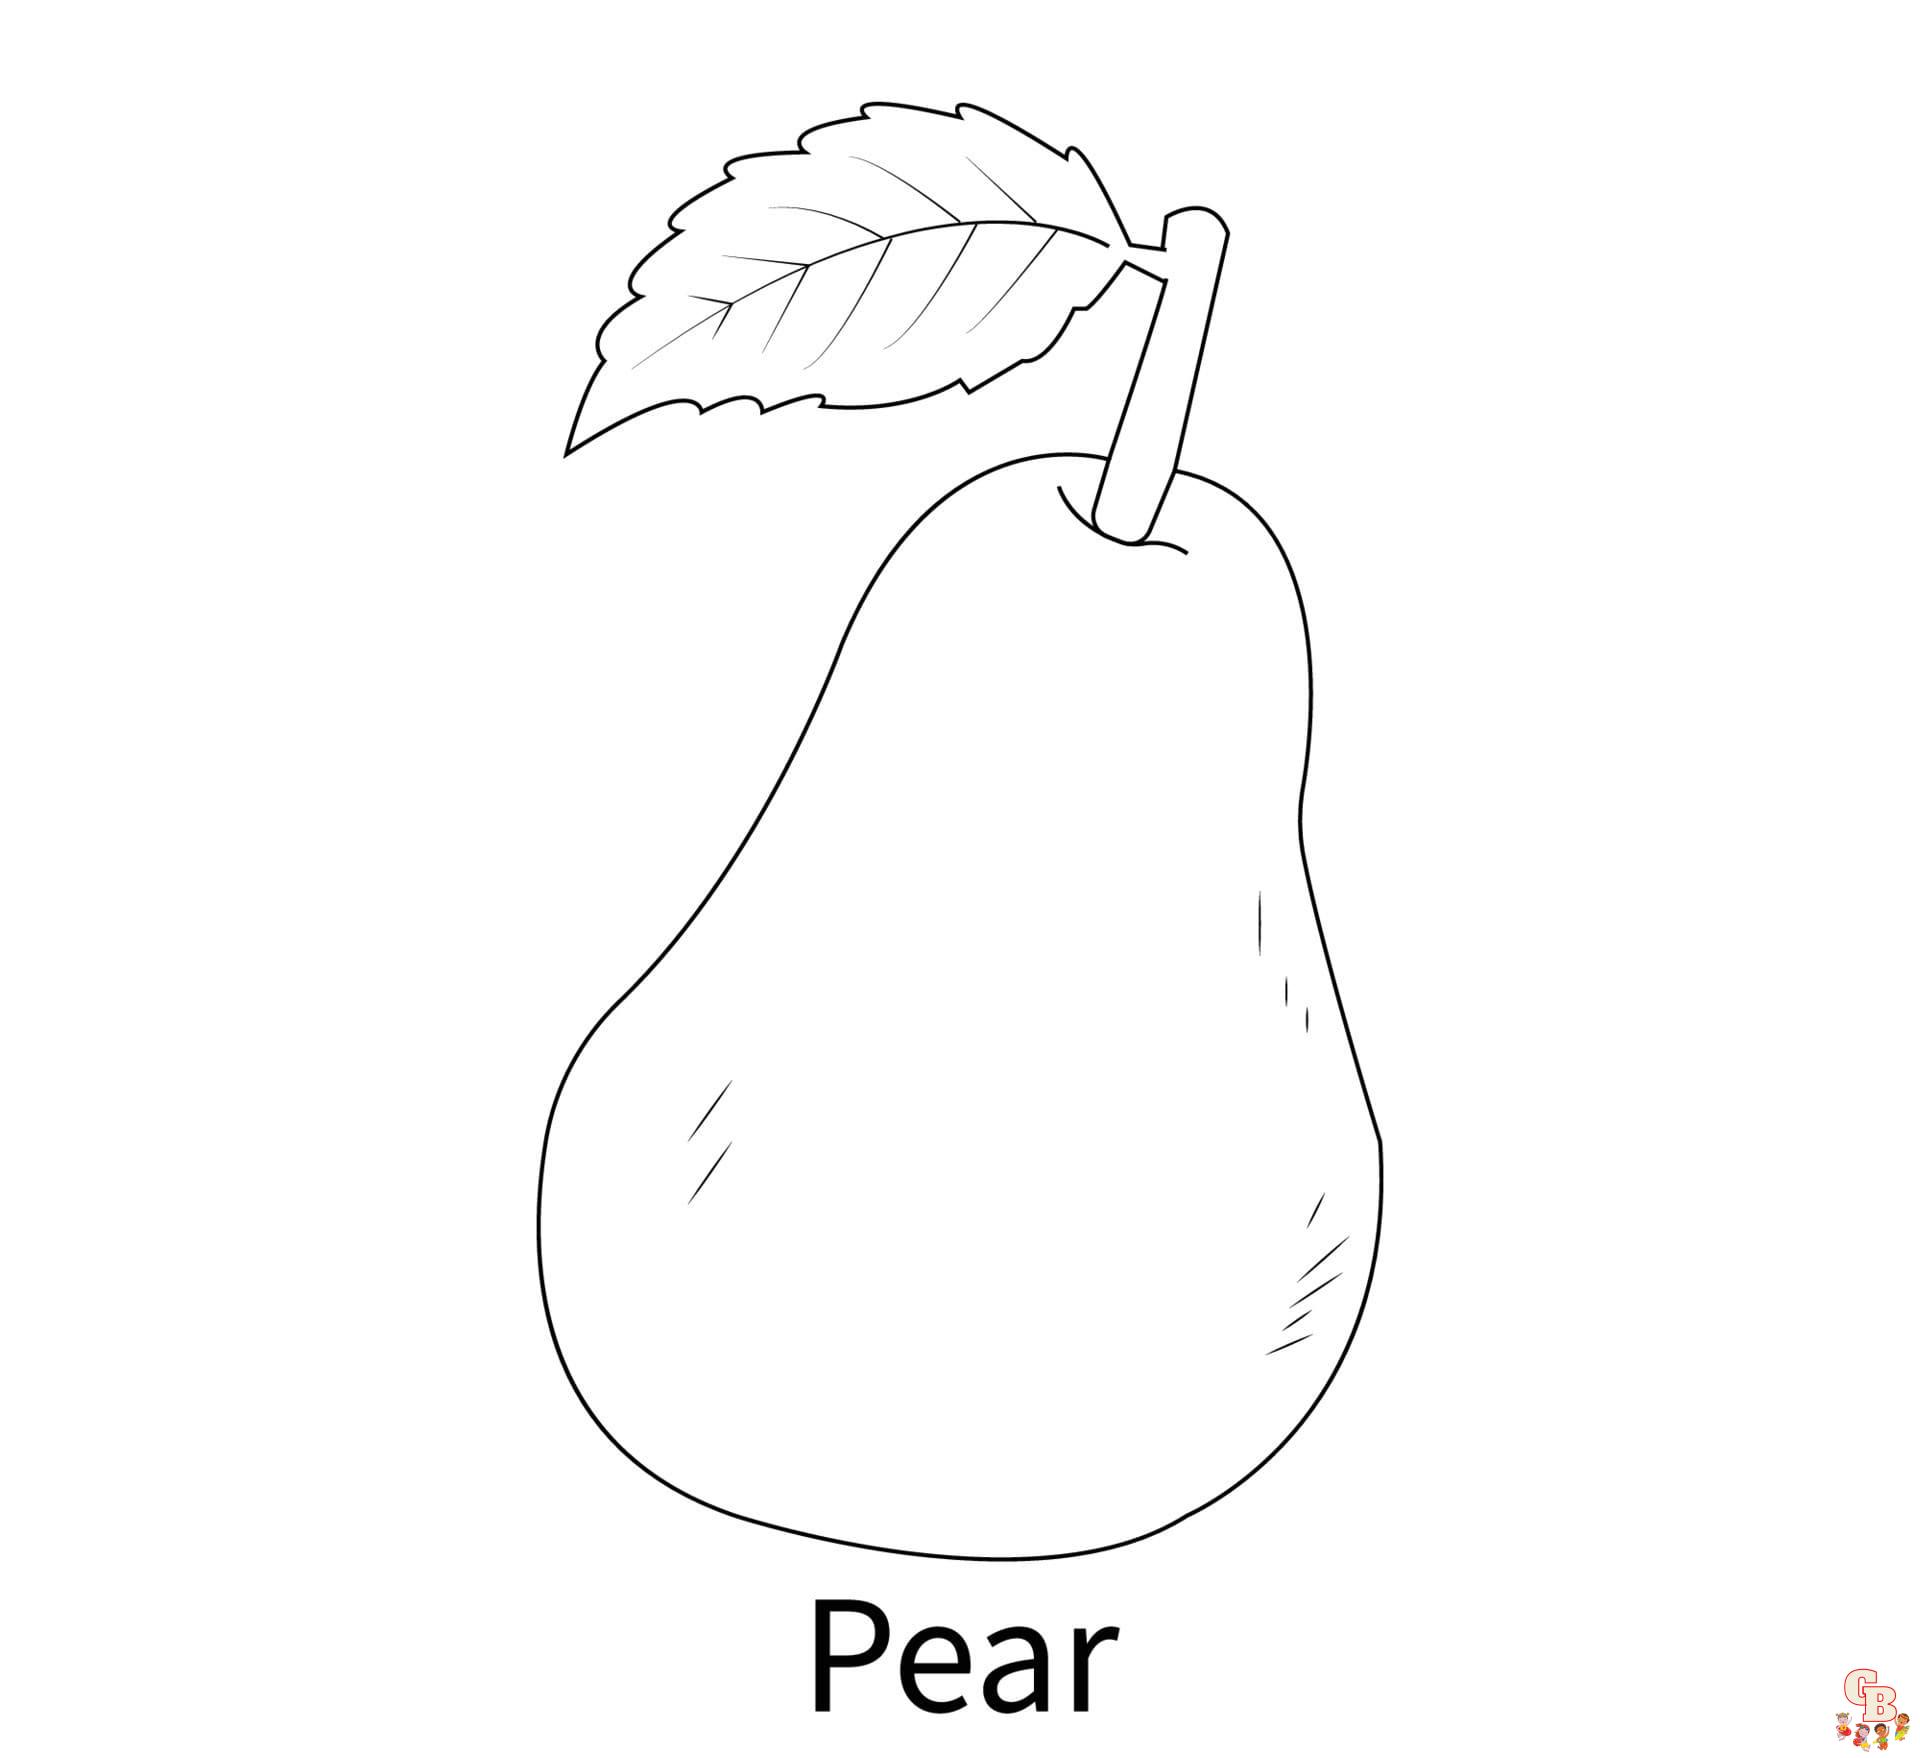 Pear coloring pages printable free